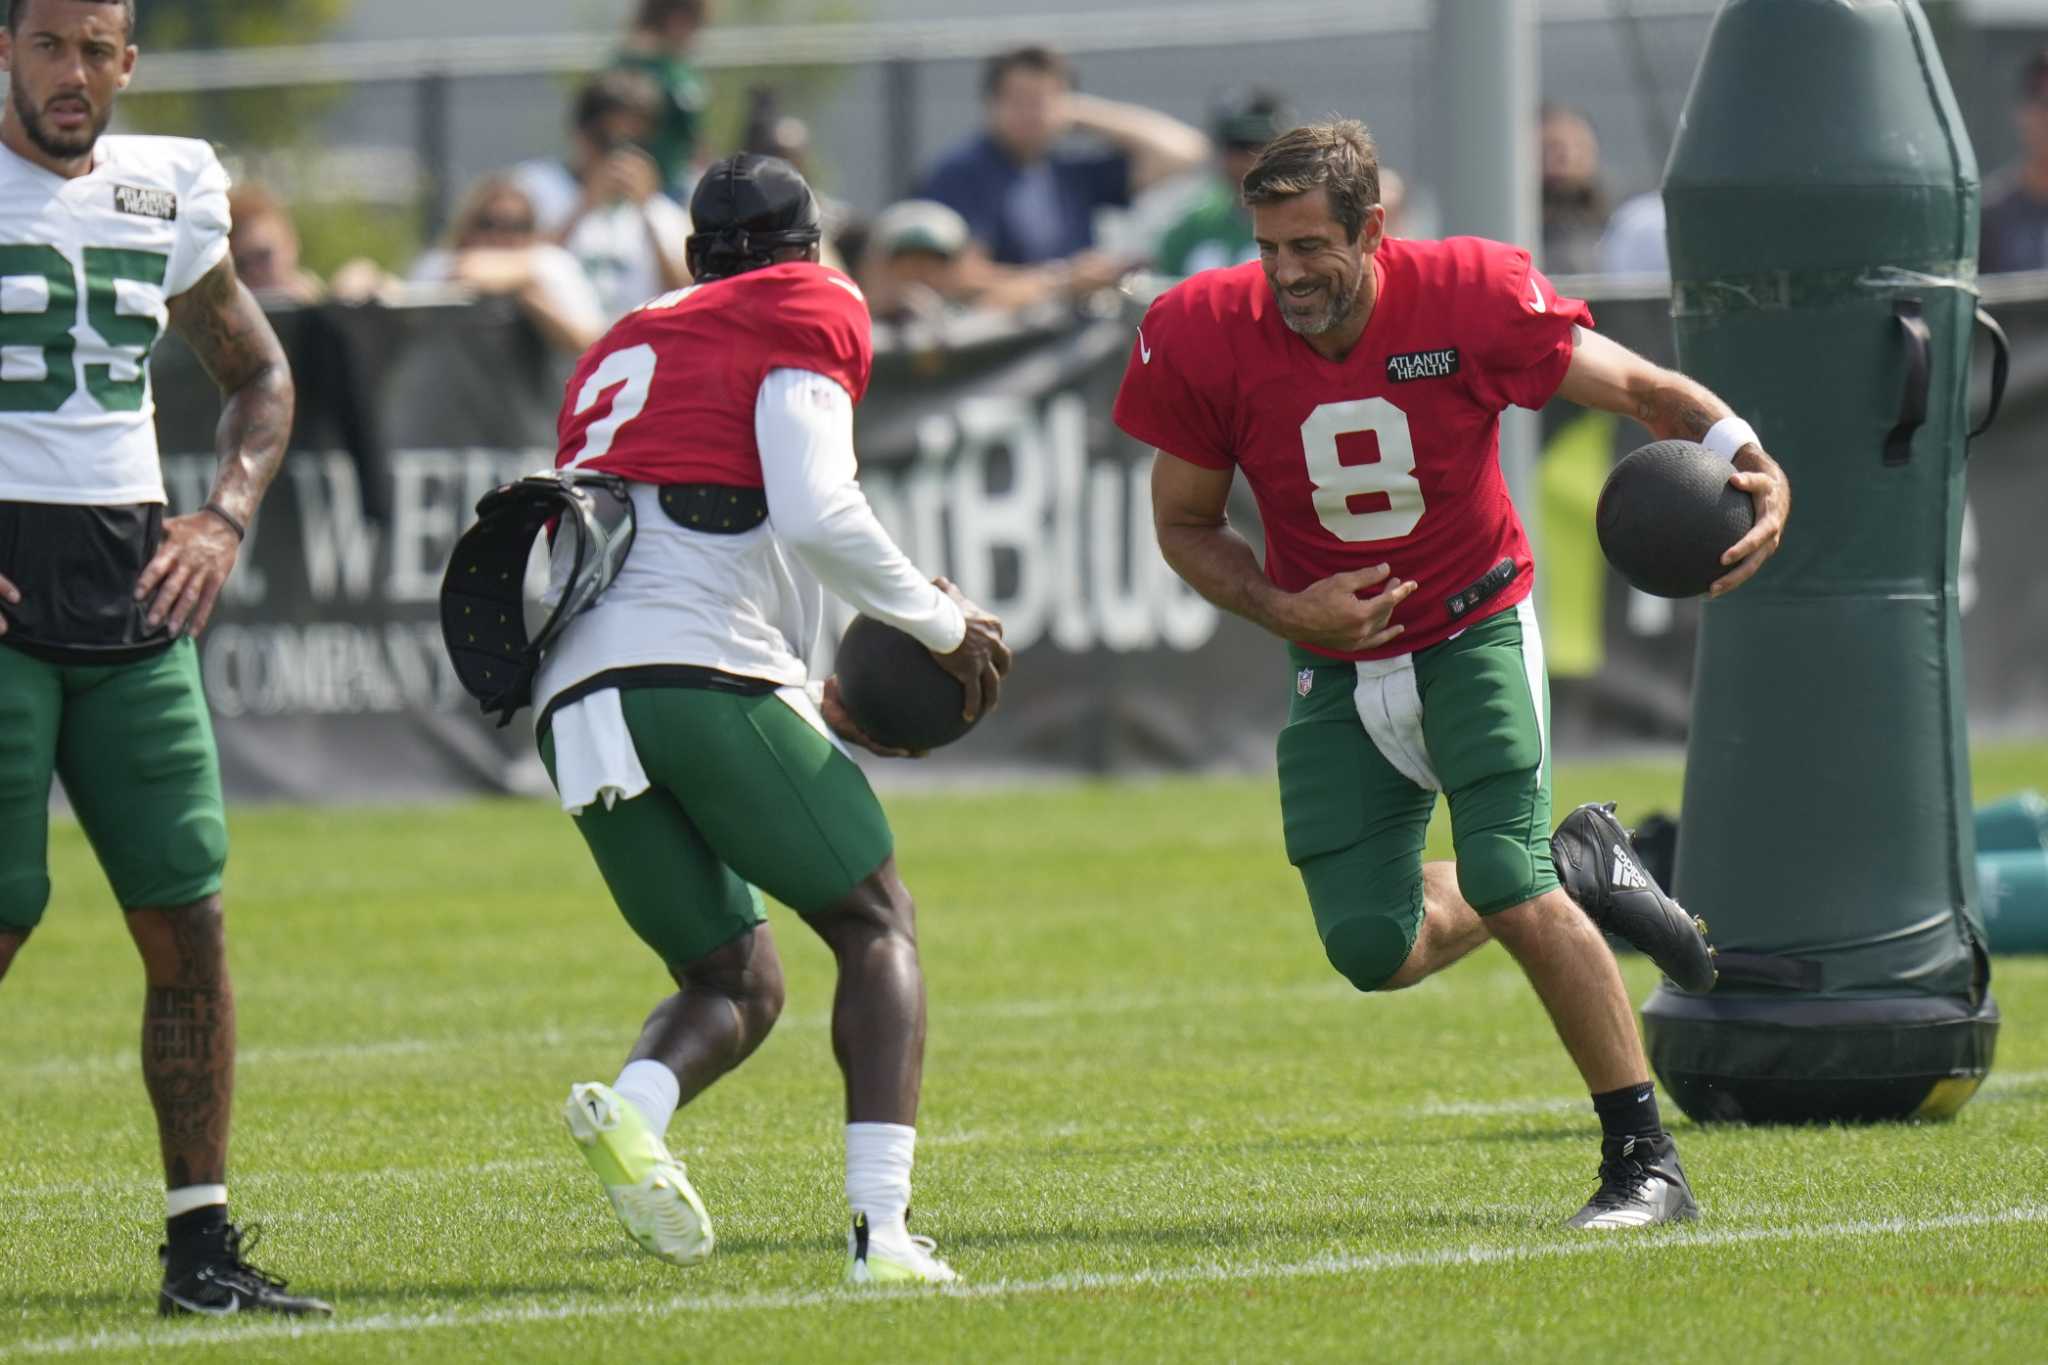 Jets coach Robert Saleh says his 'instinct' is to not play QB Aaron Rodgers during the preseason